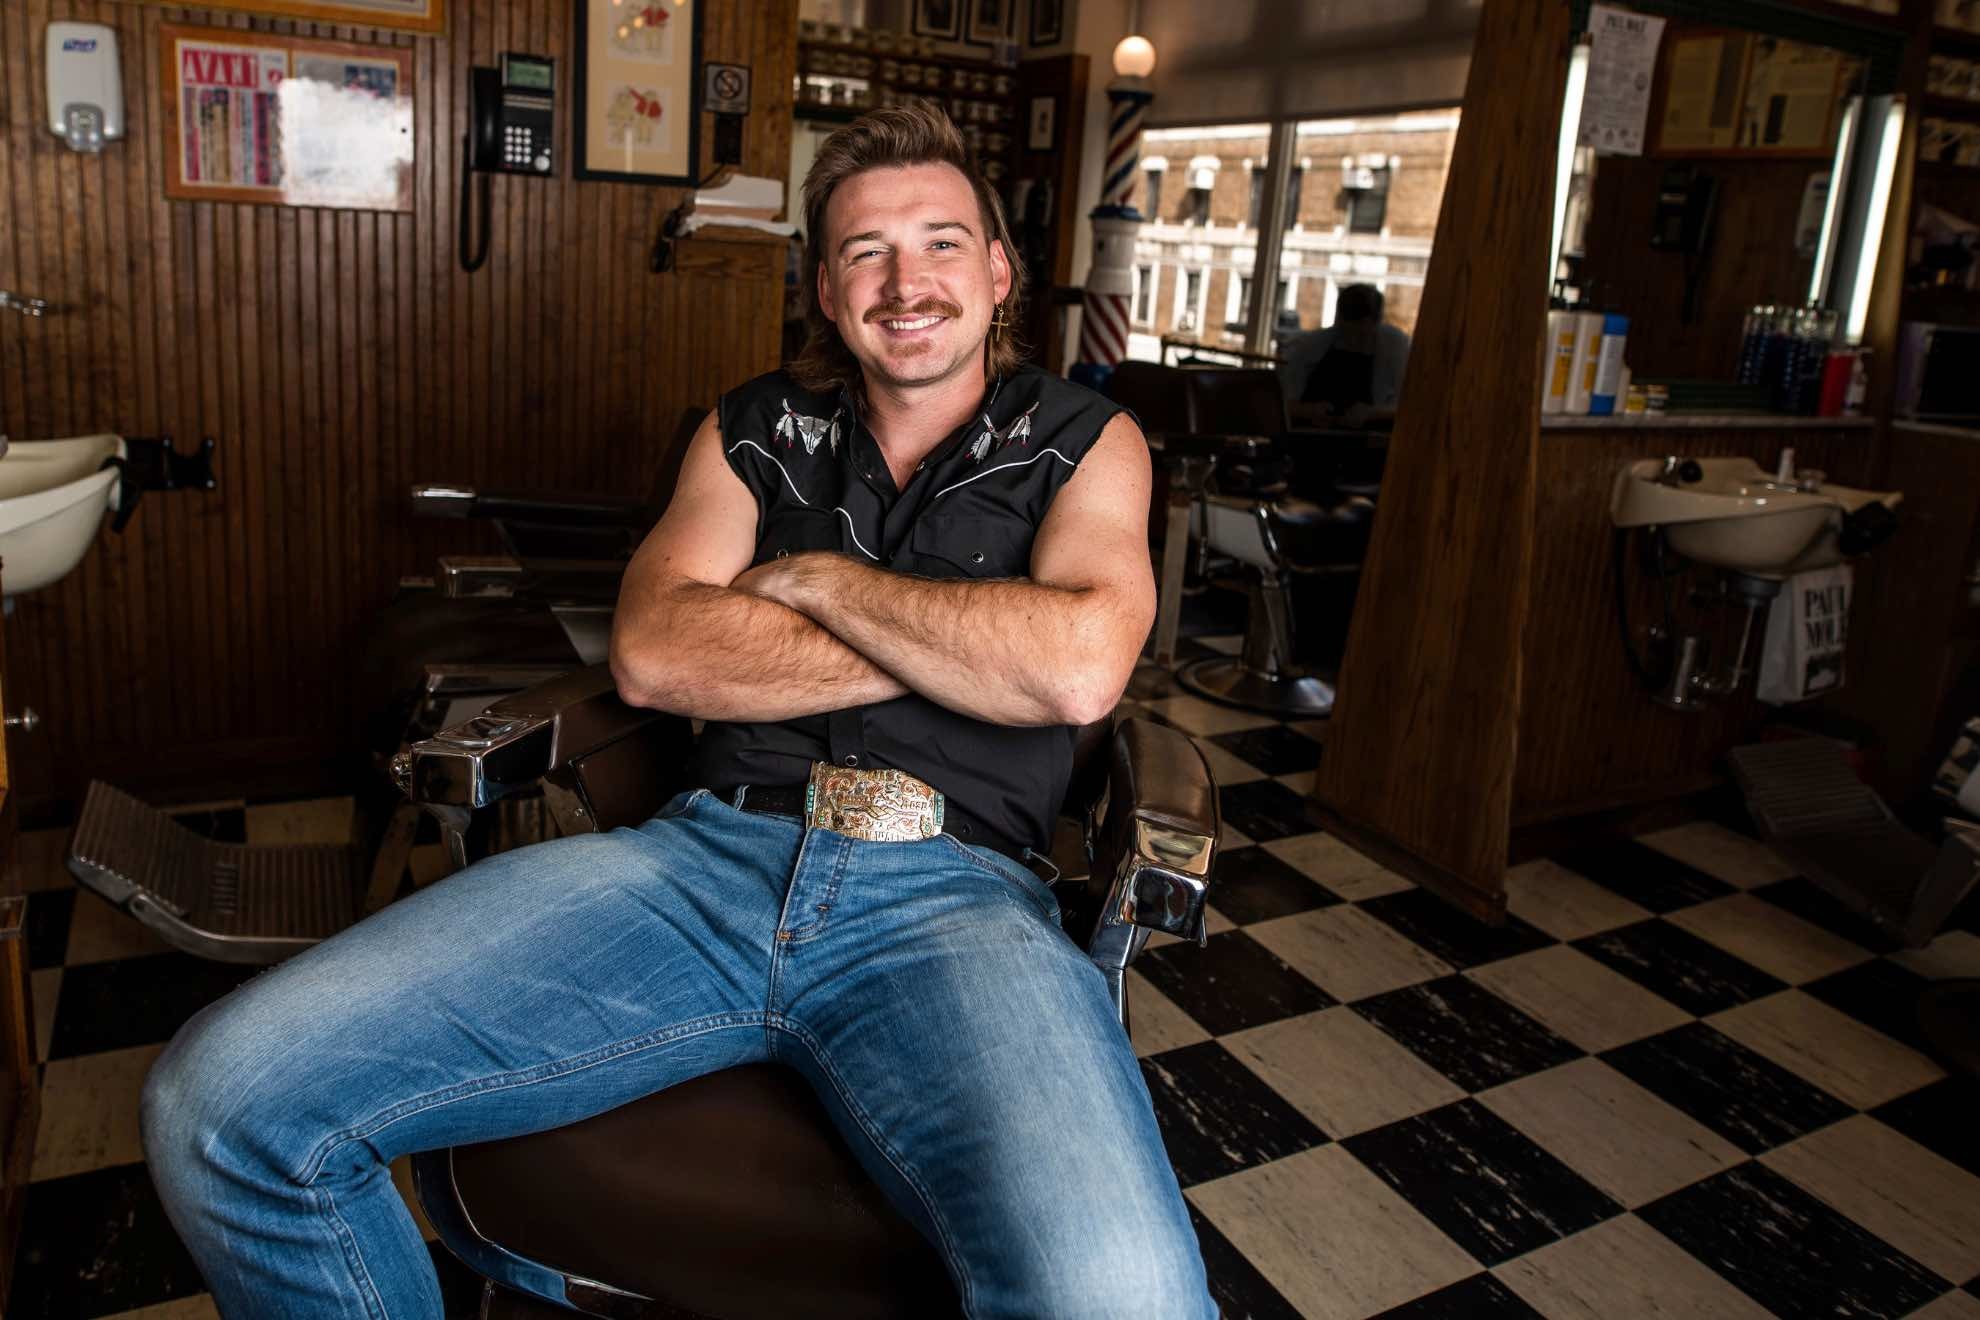 Morgan Wallen made a scene at a rooftop bar in Nashville, Tennessee